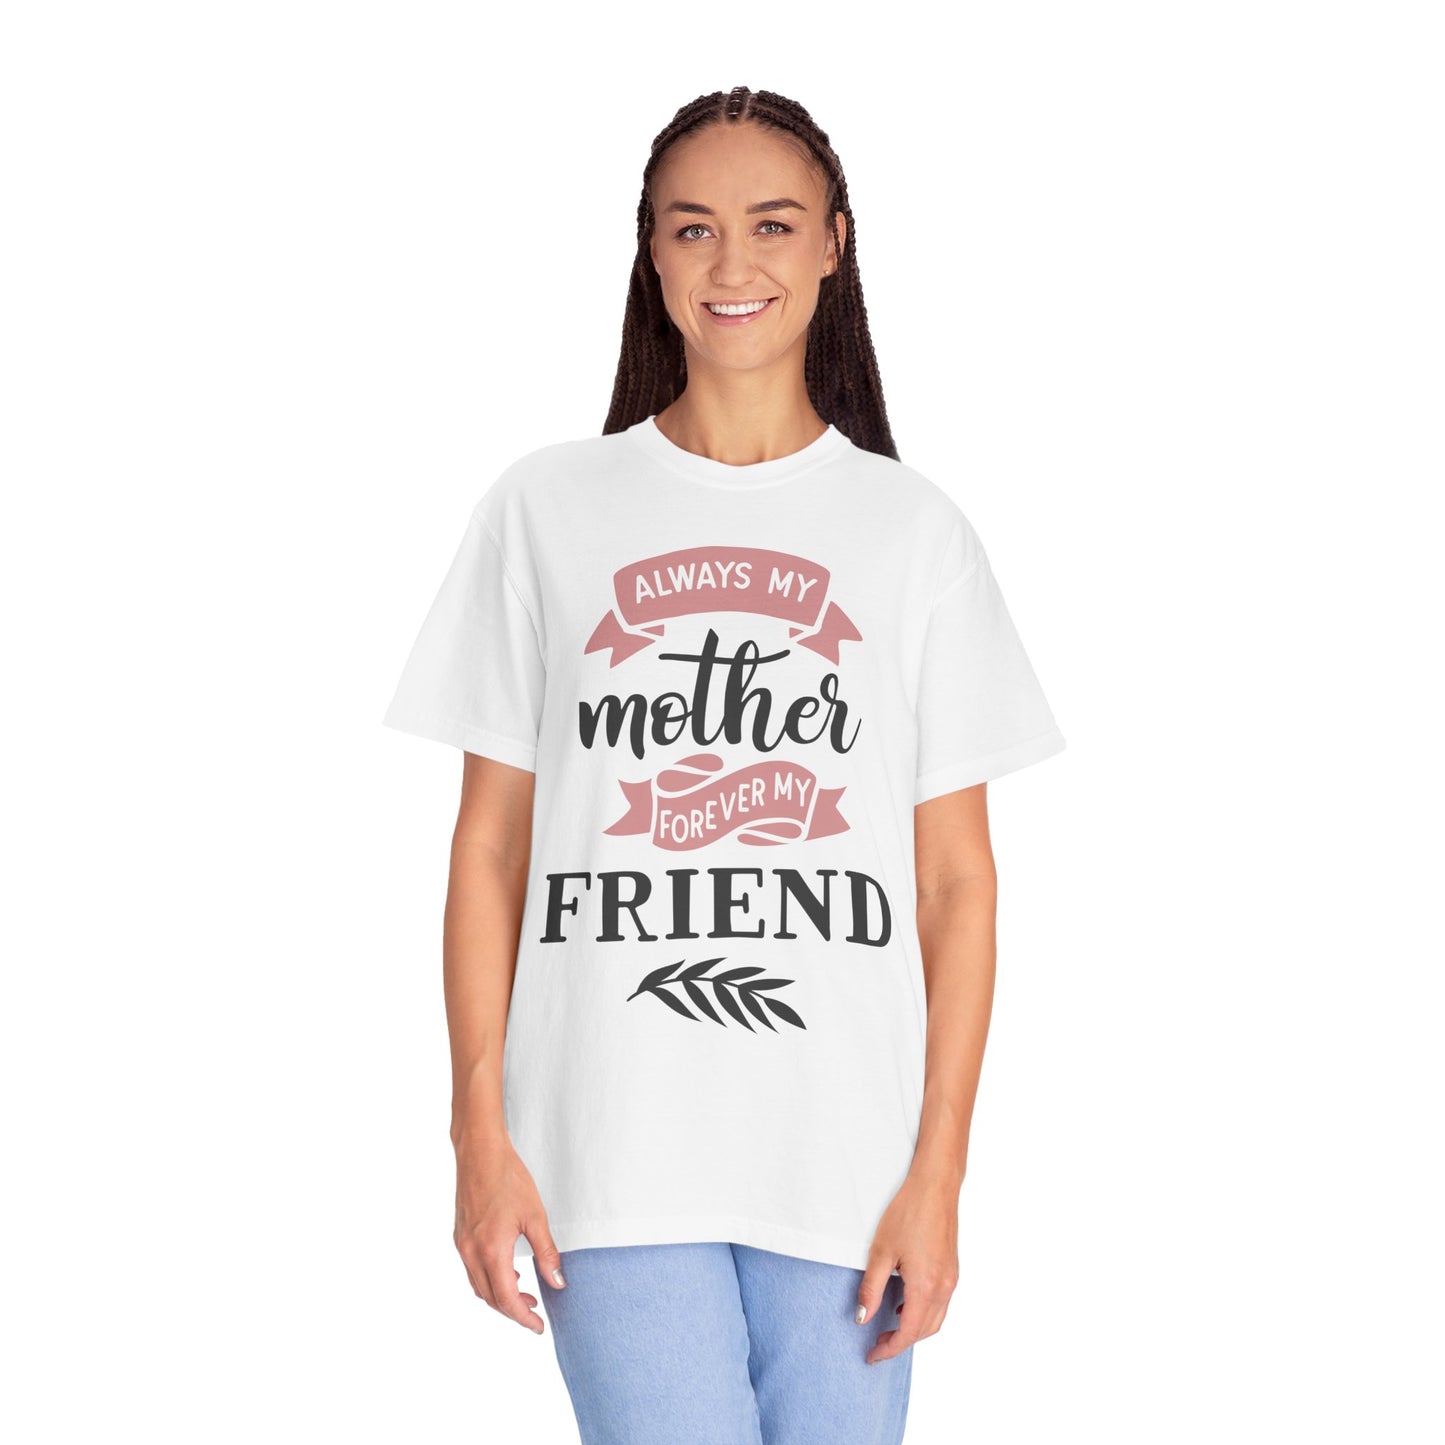 Always my mother forever my friend - Unisex Garment-Dyed T-shirt